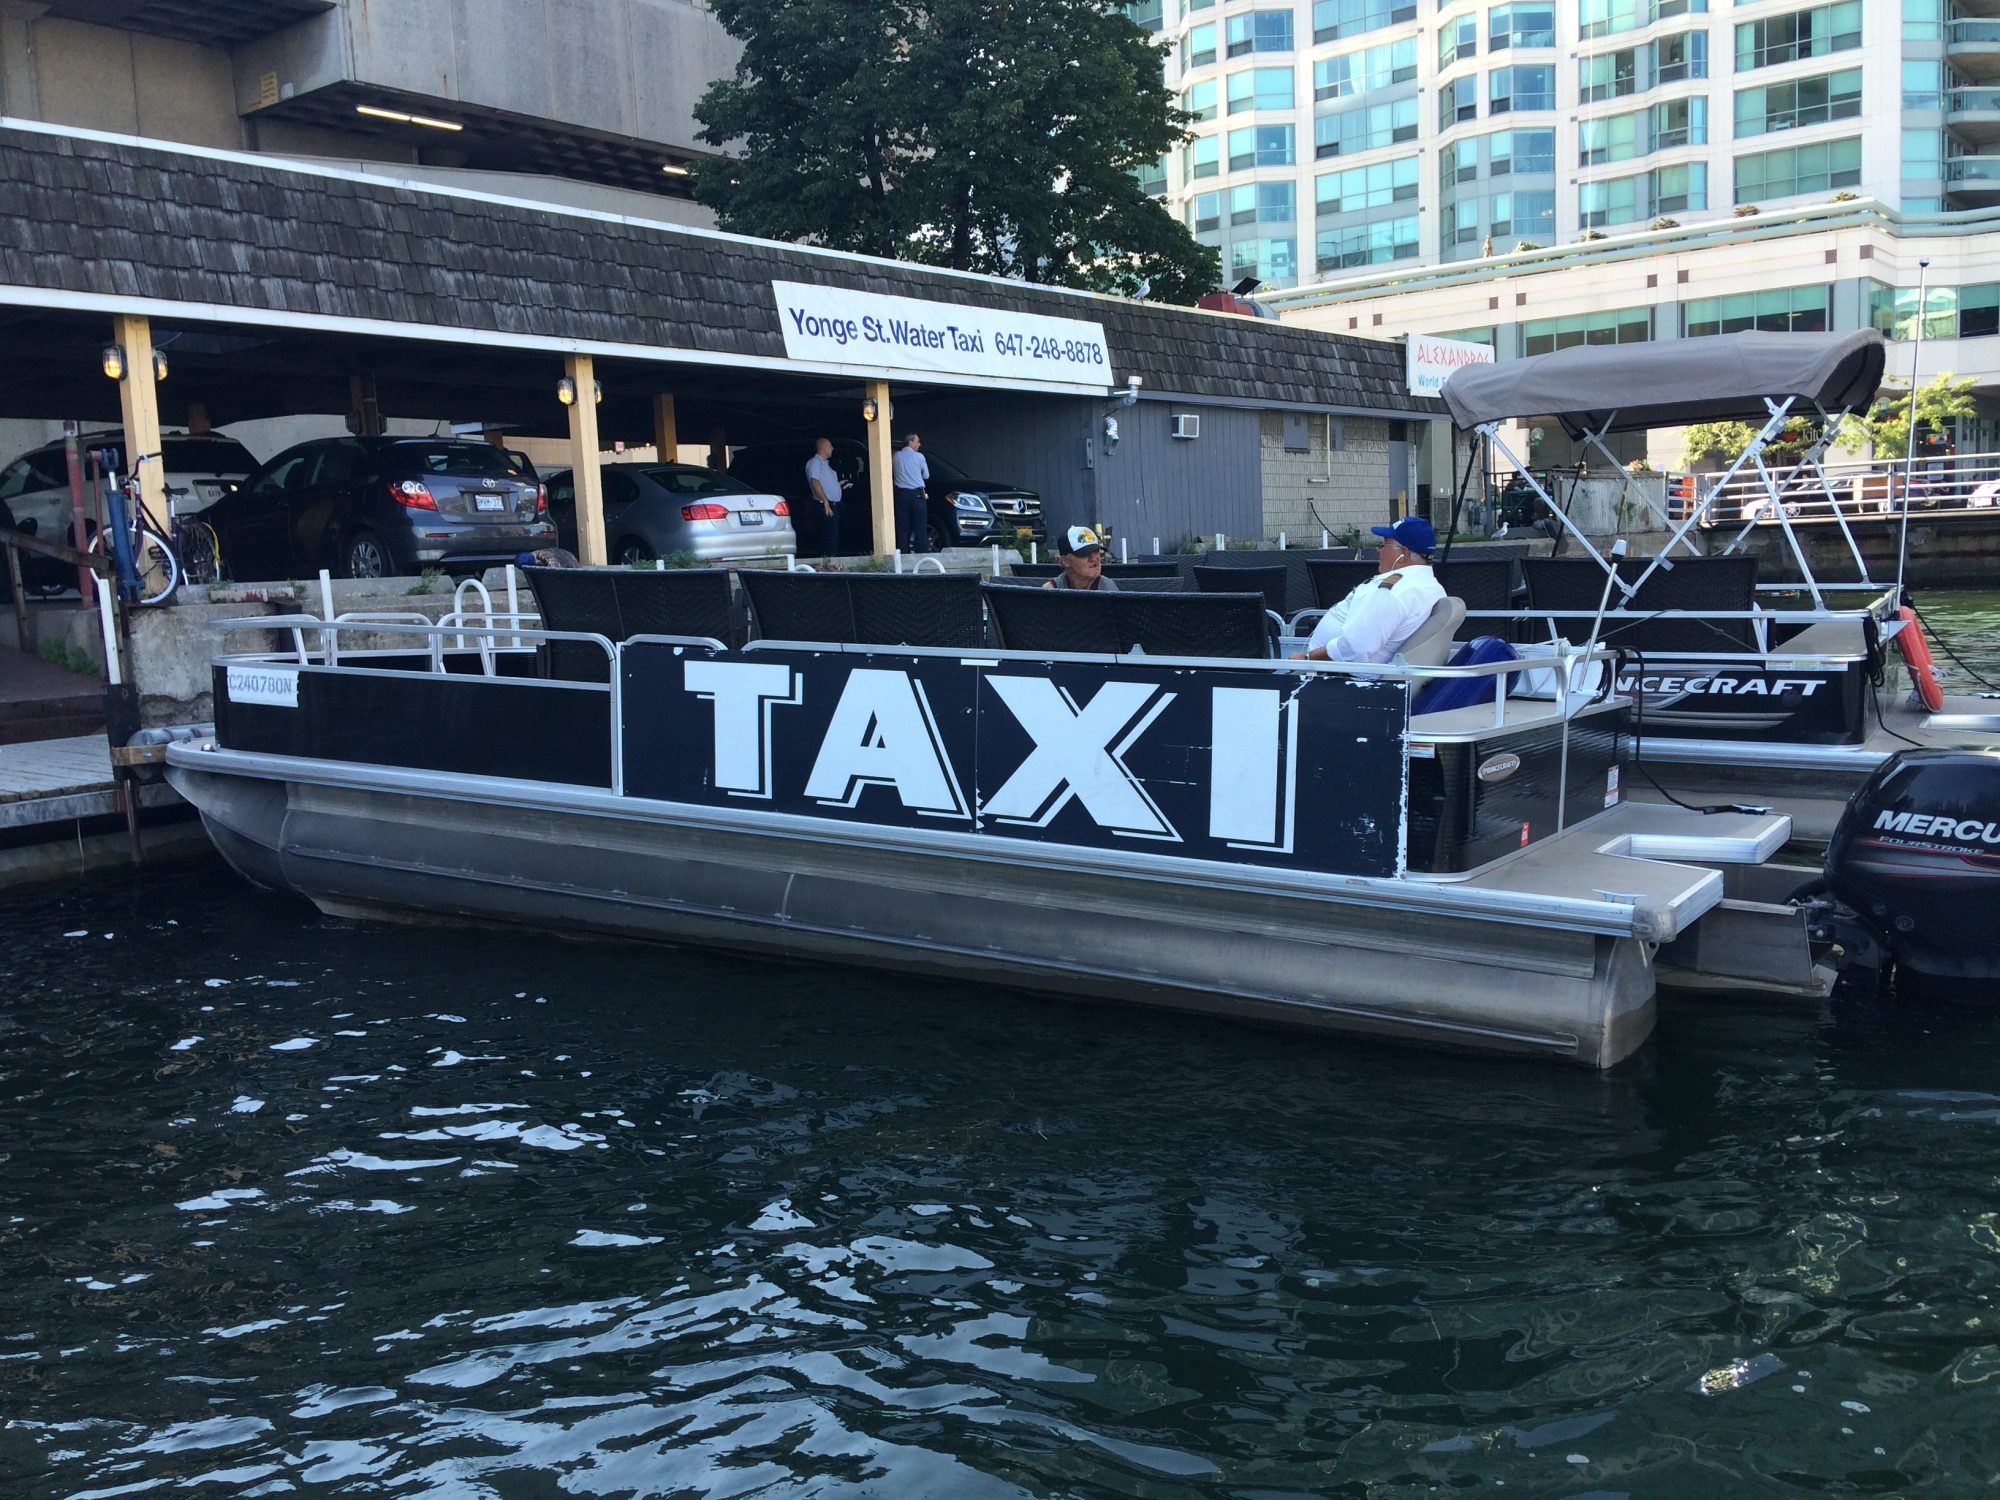 Water Taxi: Sightseeing boat tours of Toronto’s beautiful harbor and stunning islands. 2000x1500 HD Background.